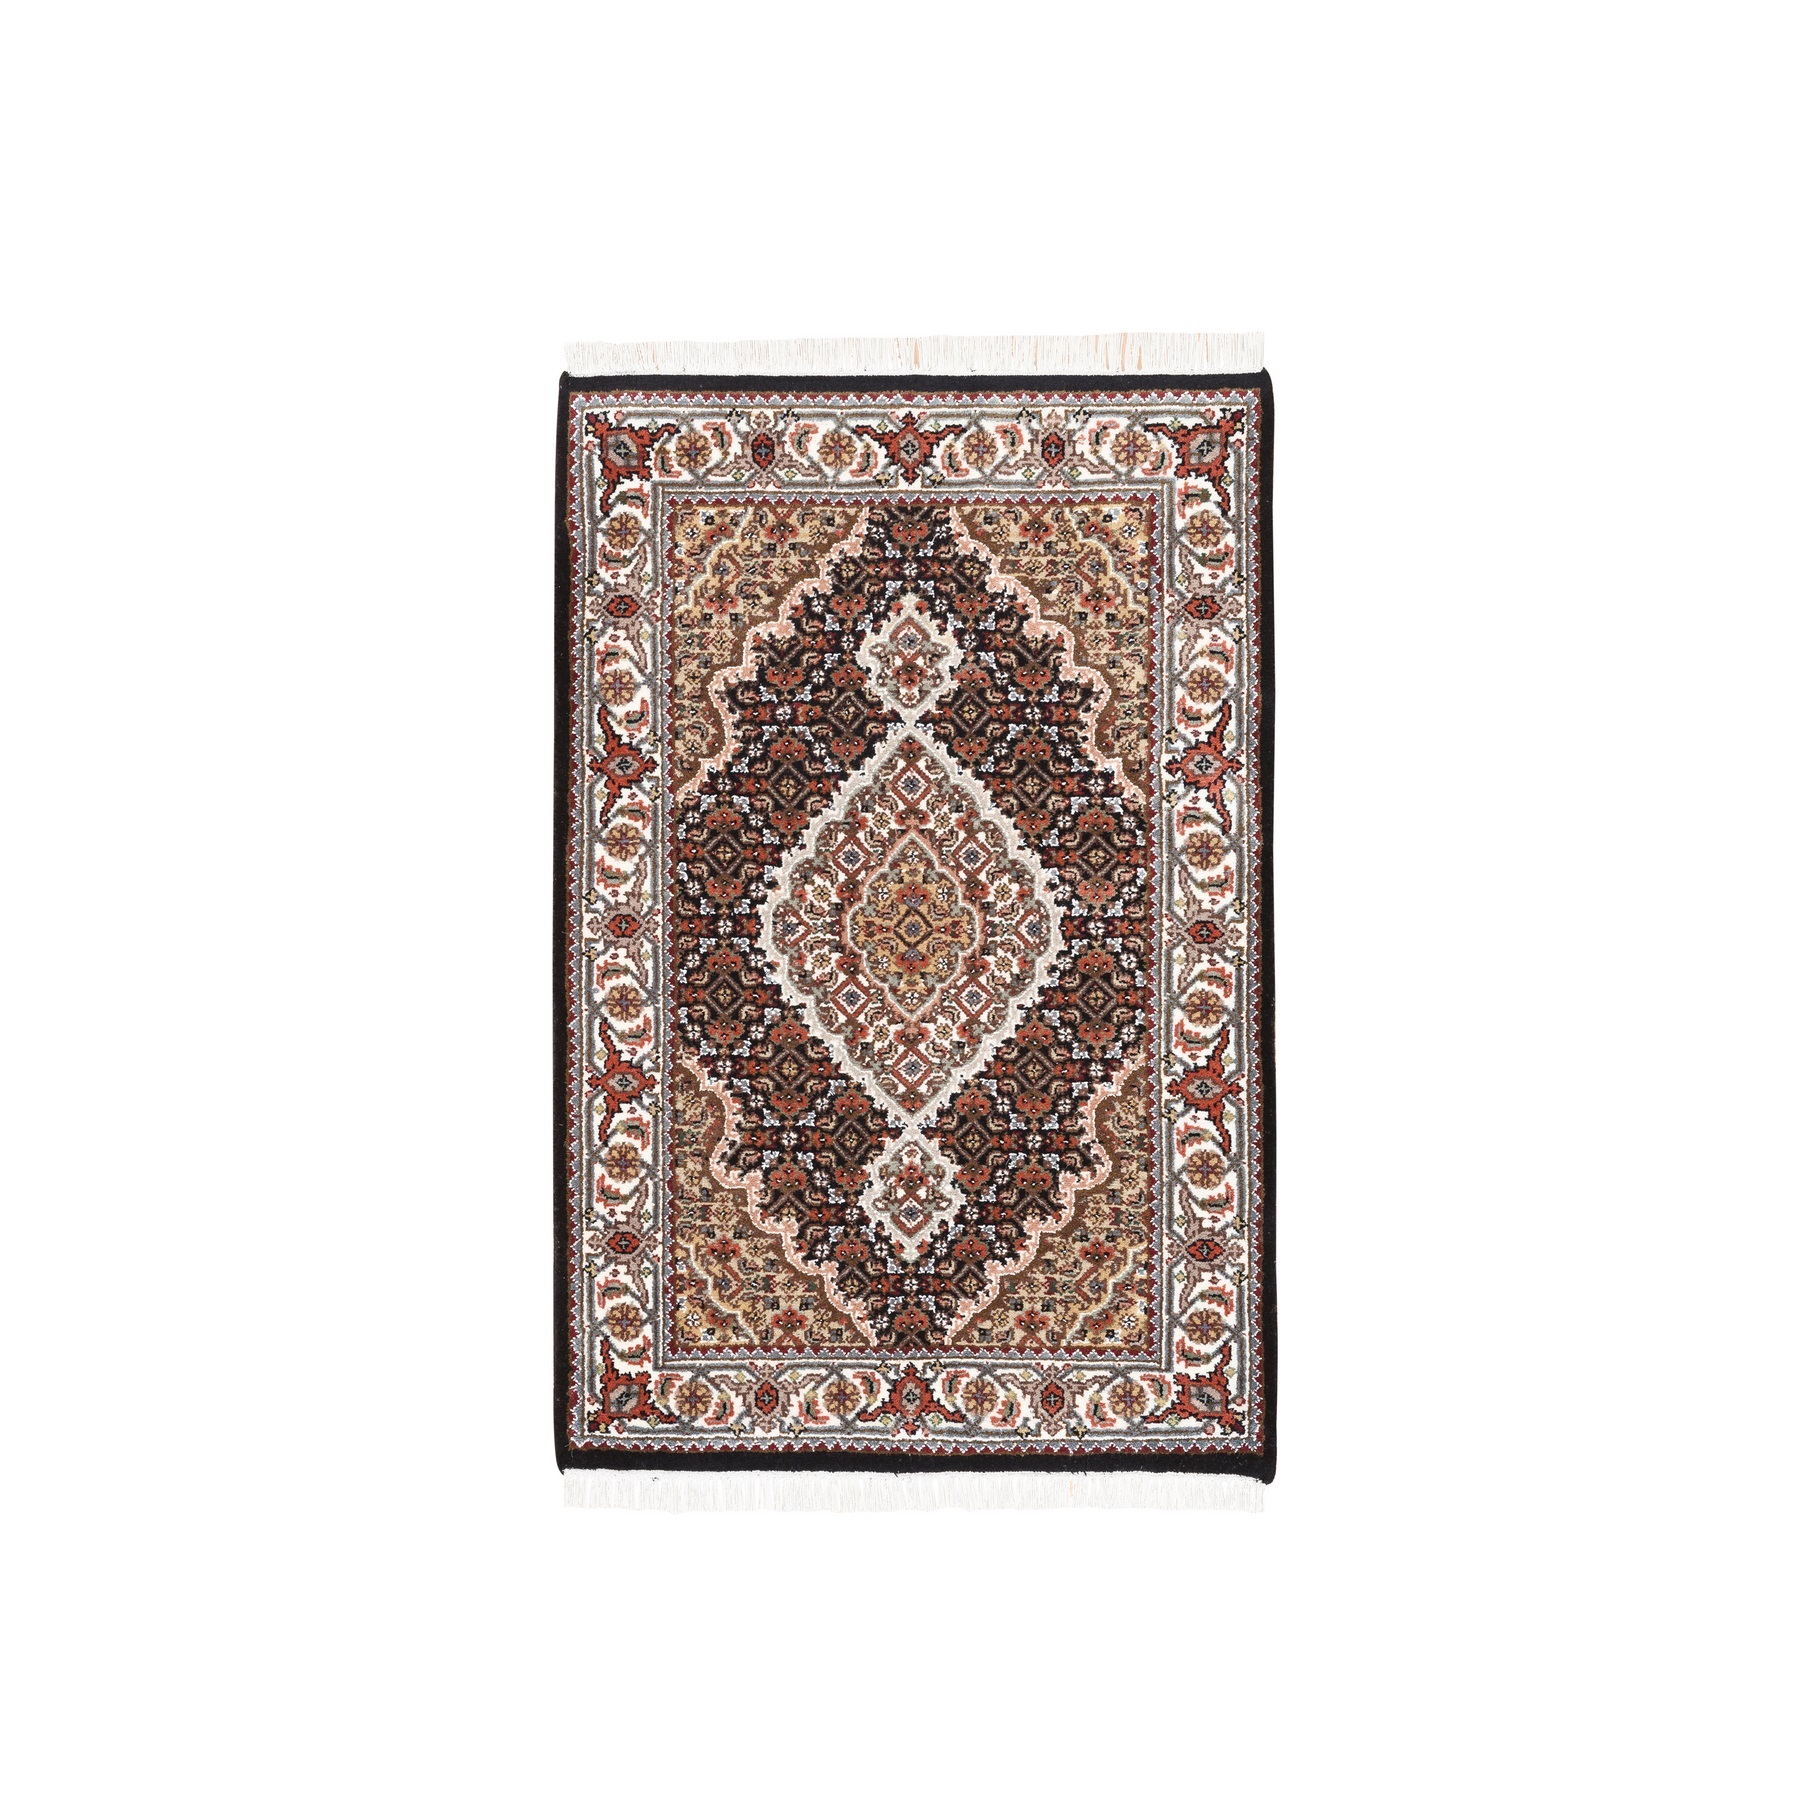 Pirniakan Collection Hand Knotted Black Rug No: 1125178